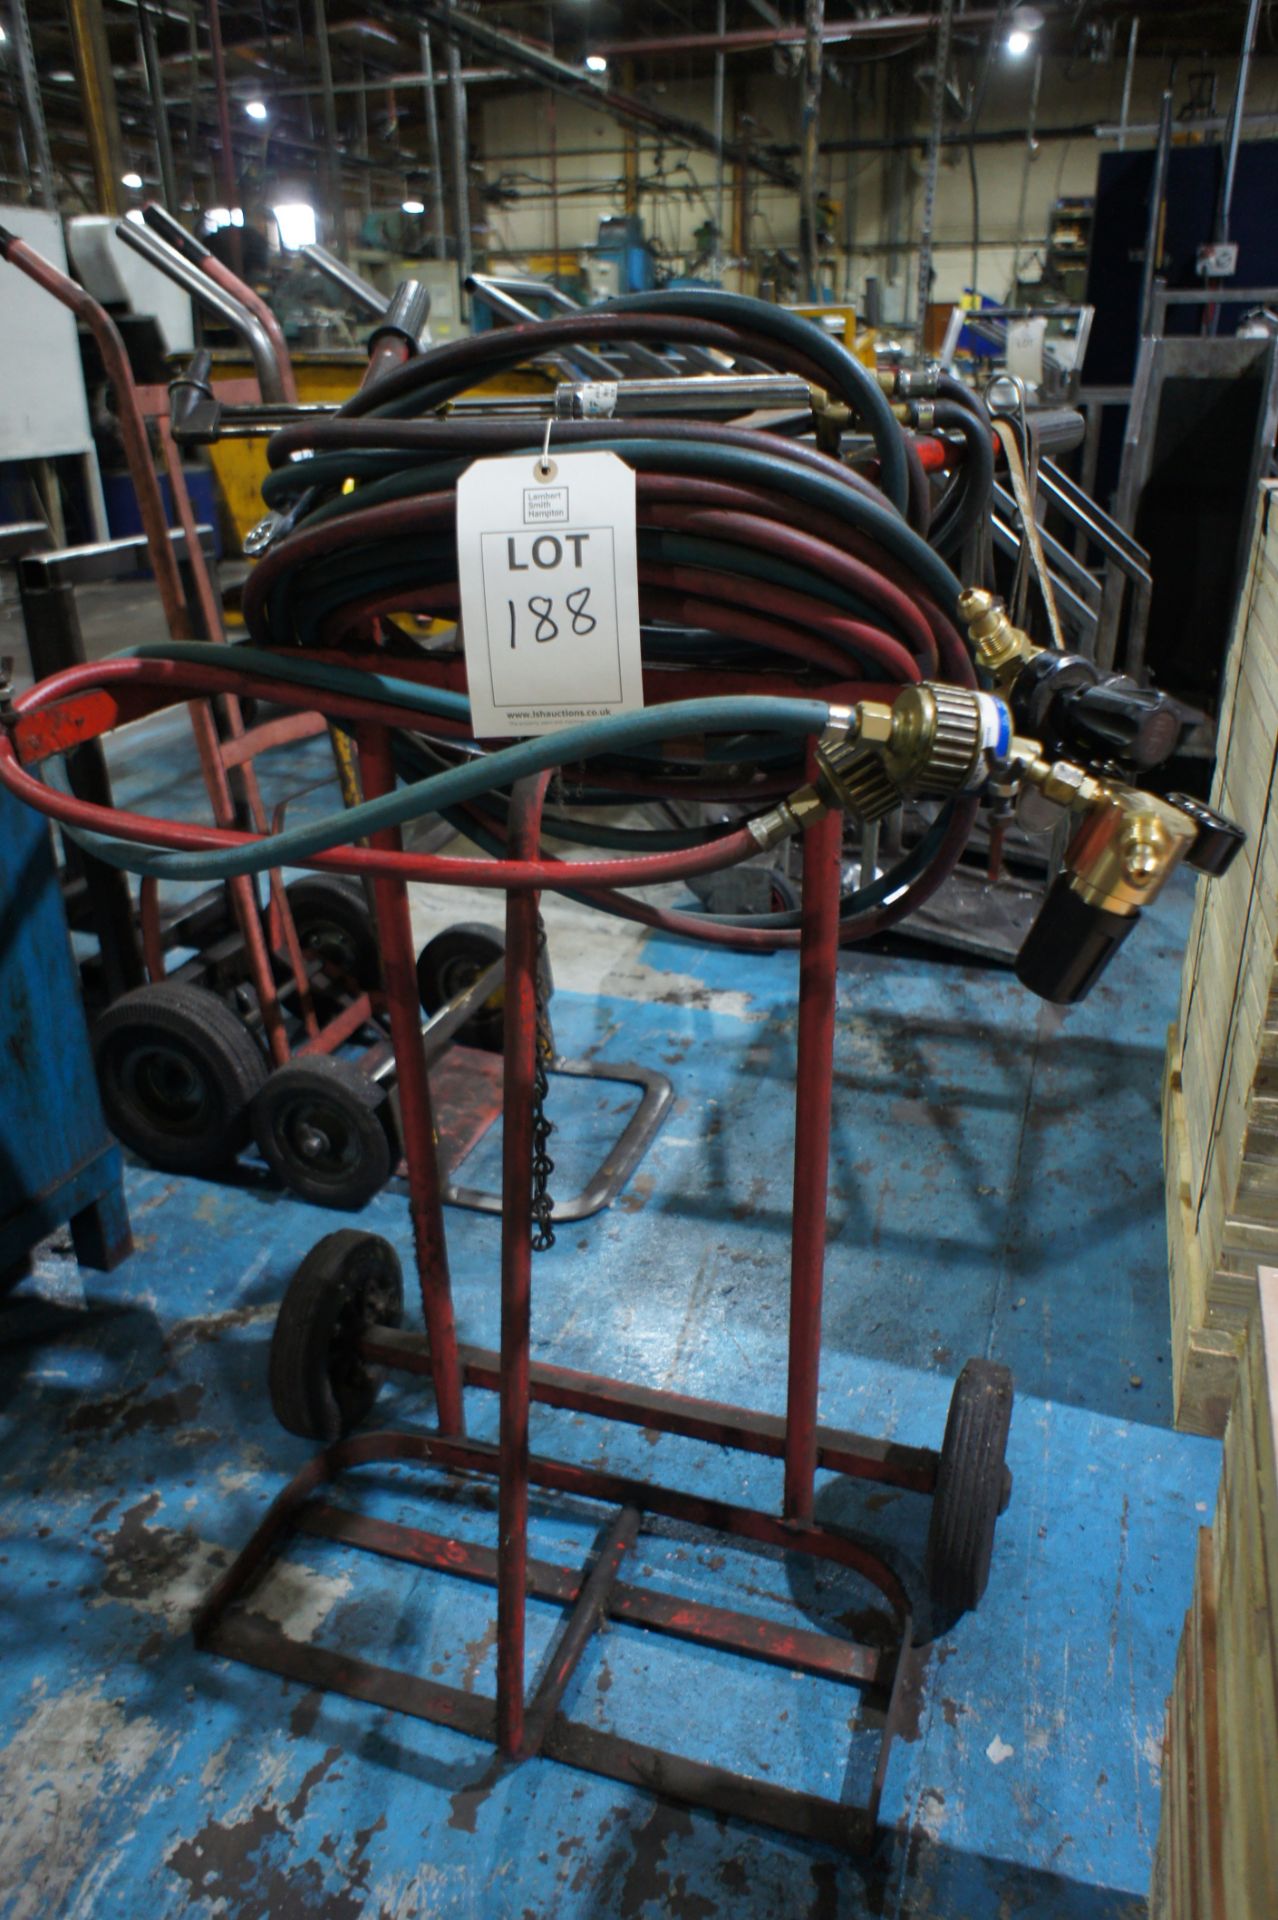 Oxy/Acetylene cutting torch, hoses, gauges and bottle cart